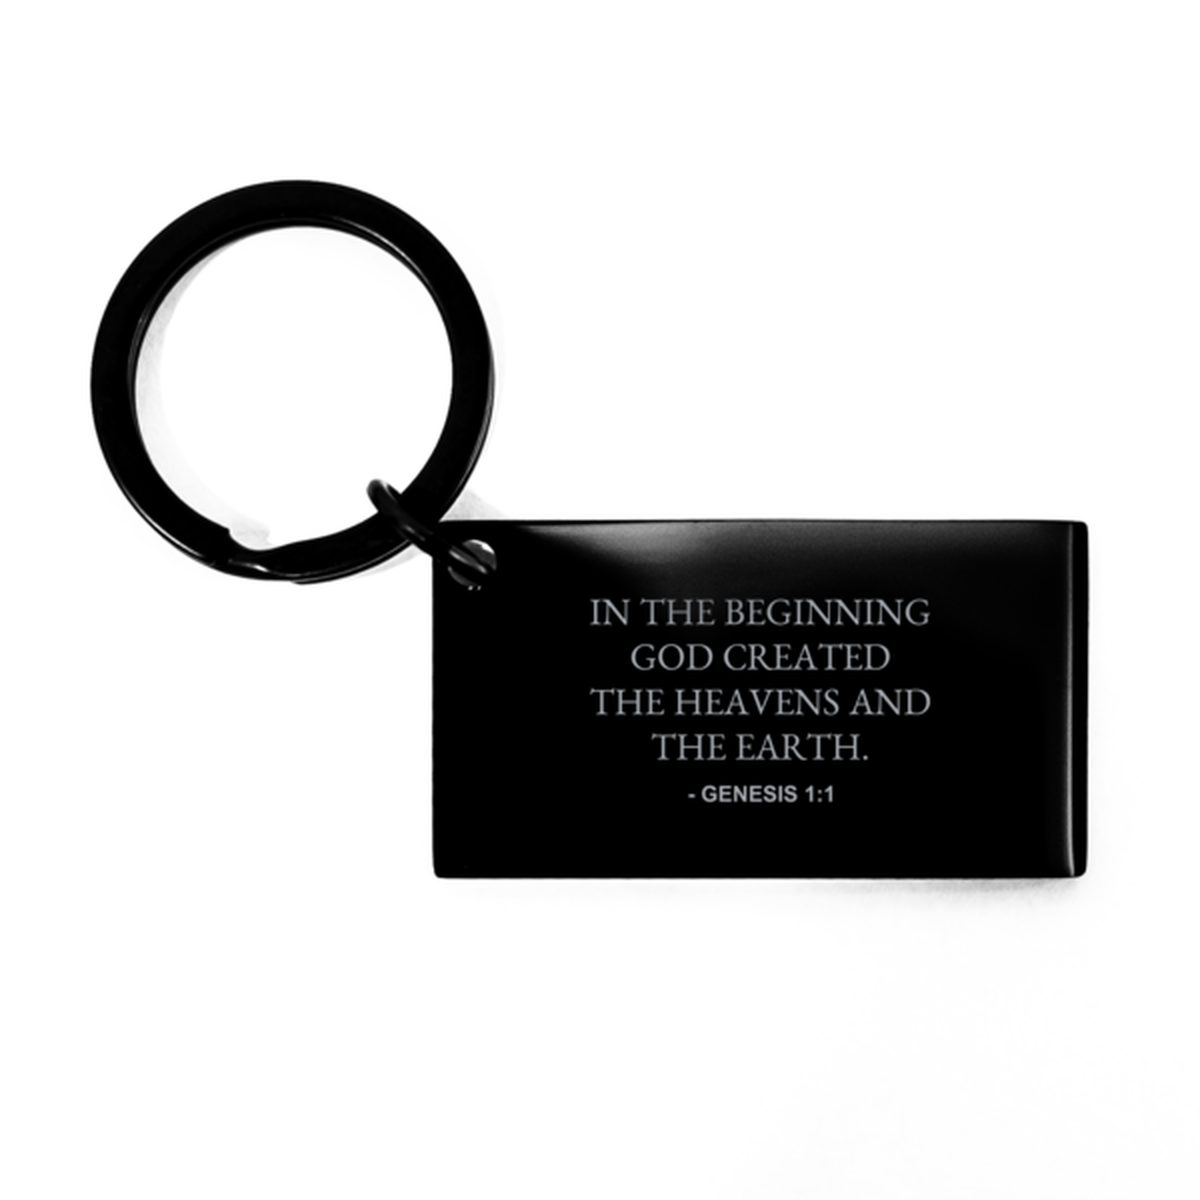 Bible Verse Black Keychain, Genesis 1:1 In The Beginning God Created The Heavens And, Christian Inspirational Key Ring Gifts For Men Women